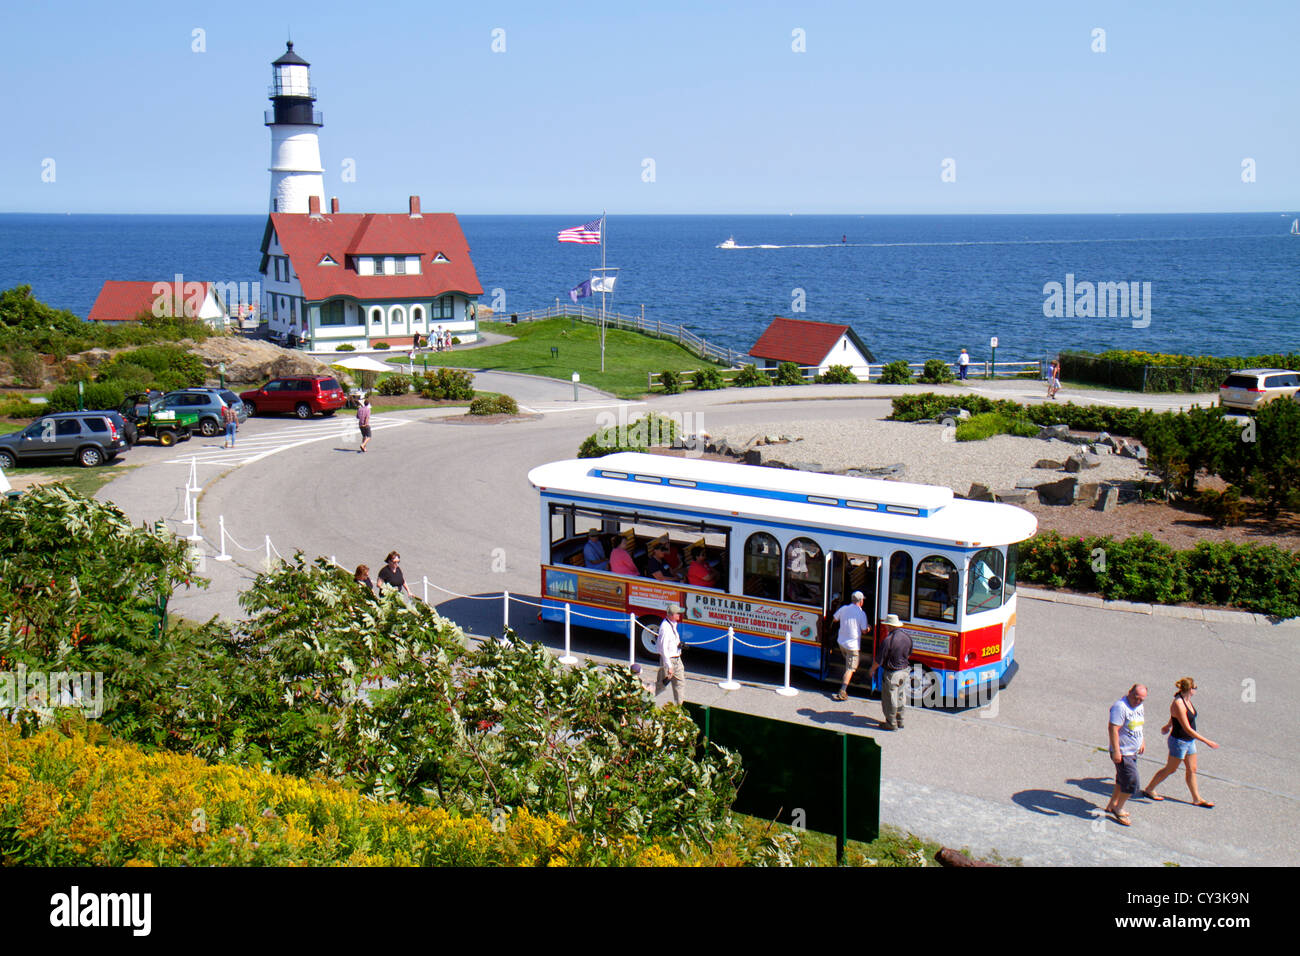 Portland Maine,New England,Cape Elizabeth,Portland Head Light,lighthouse,Keeper's Quarters,Fort Ft. Williams Park,trolley,Casco Bay water,At Stock Photo